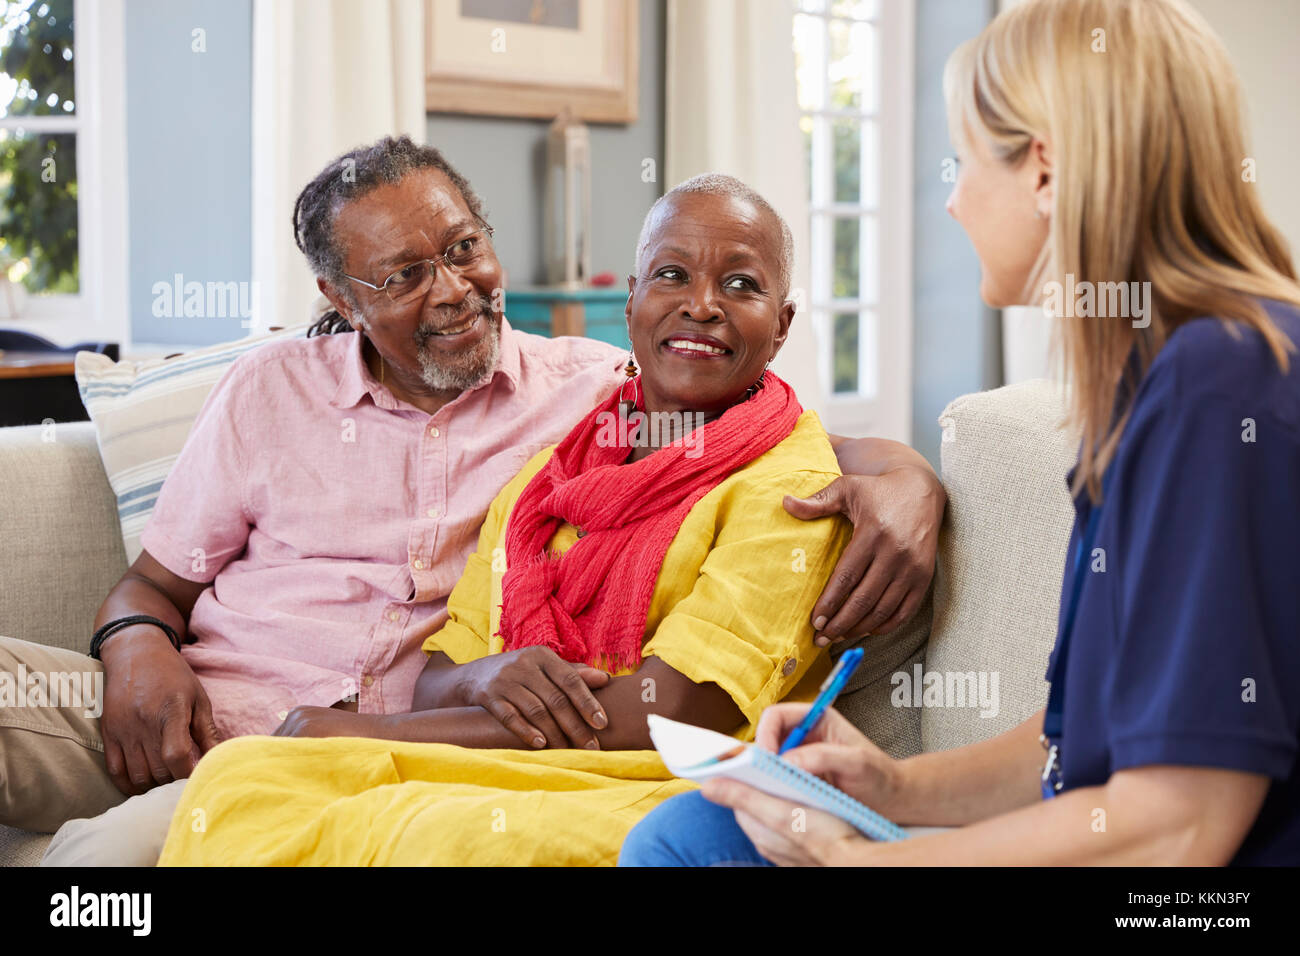 Female Support Worker Visits Senior Couple At Home Stock Photo